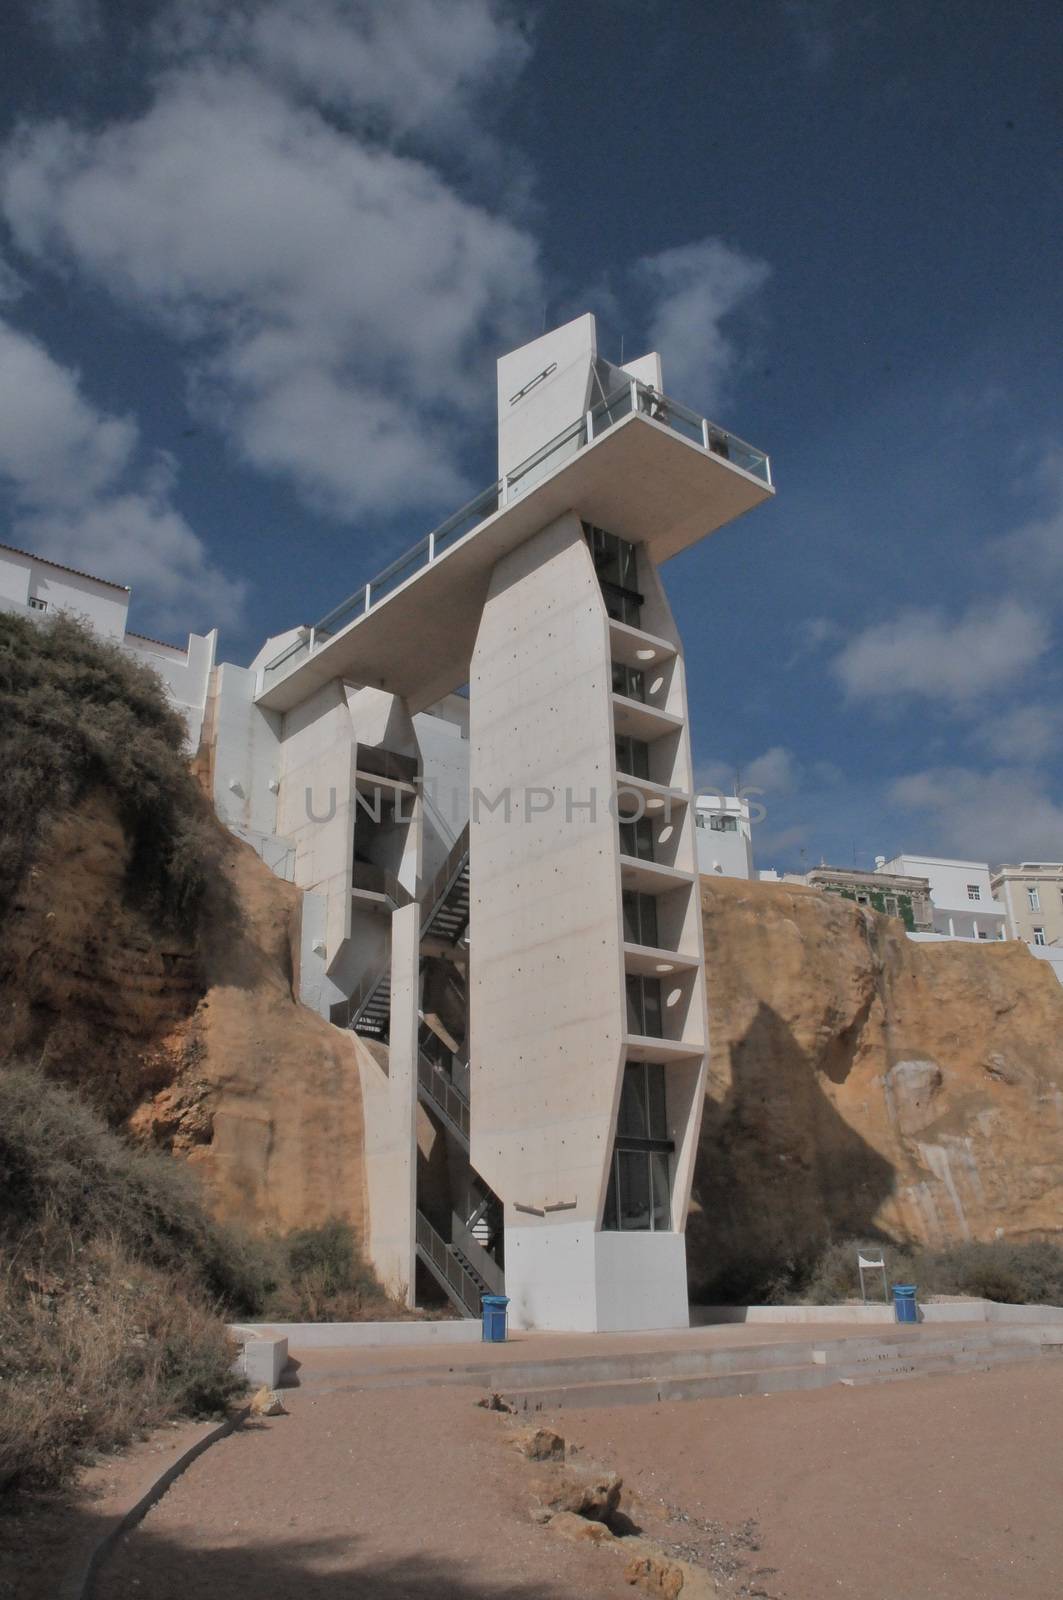 Escalator or stairs to cliff top